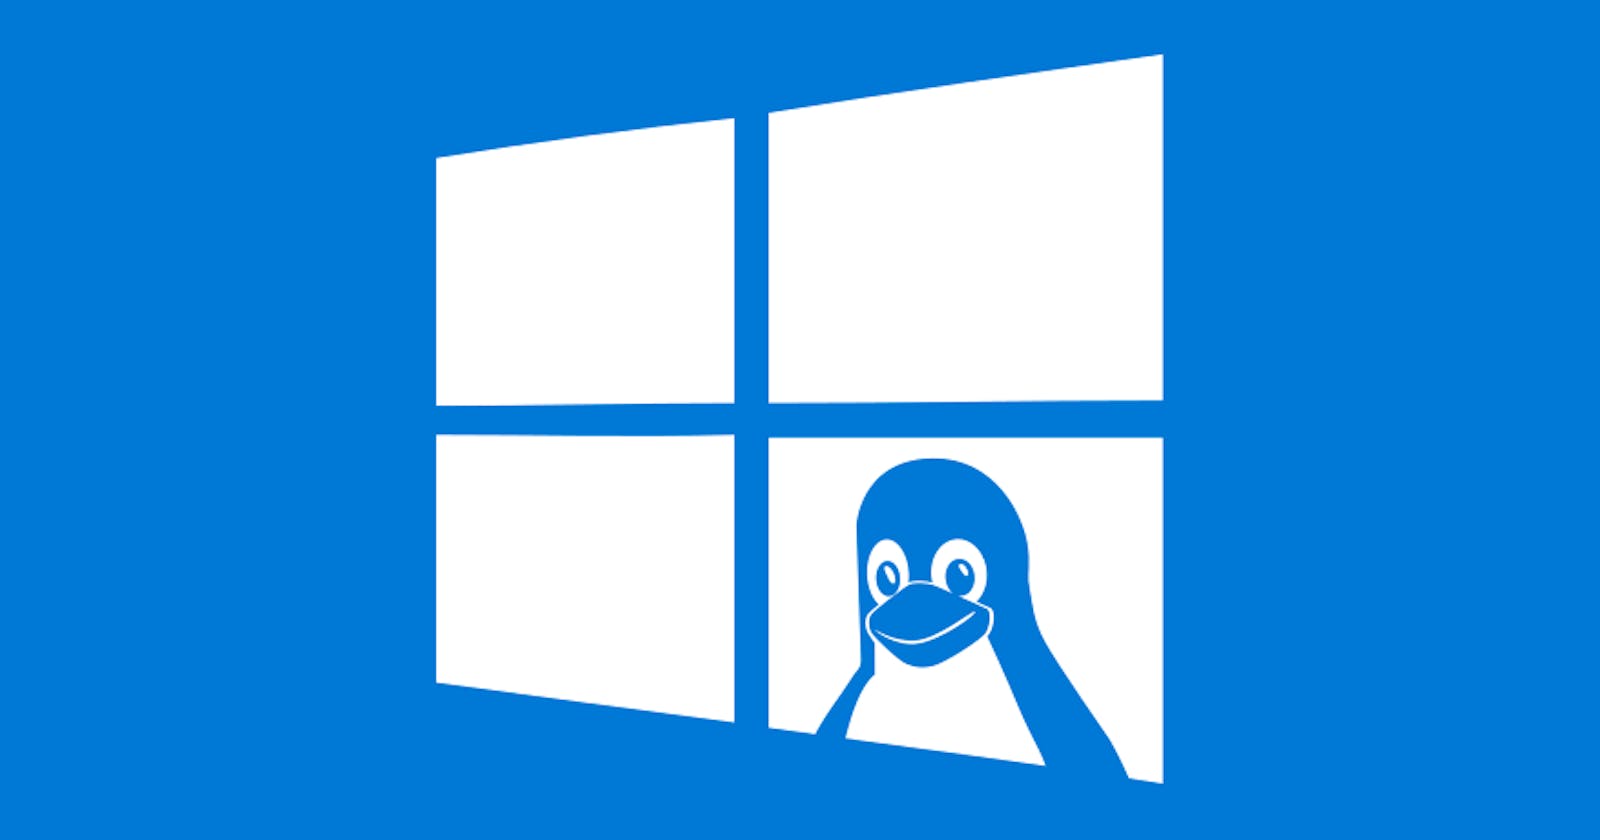 Installing WSL with Systemd support for Windows User